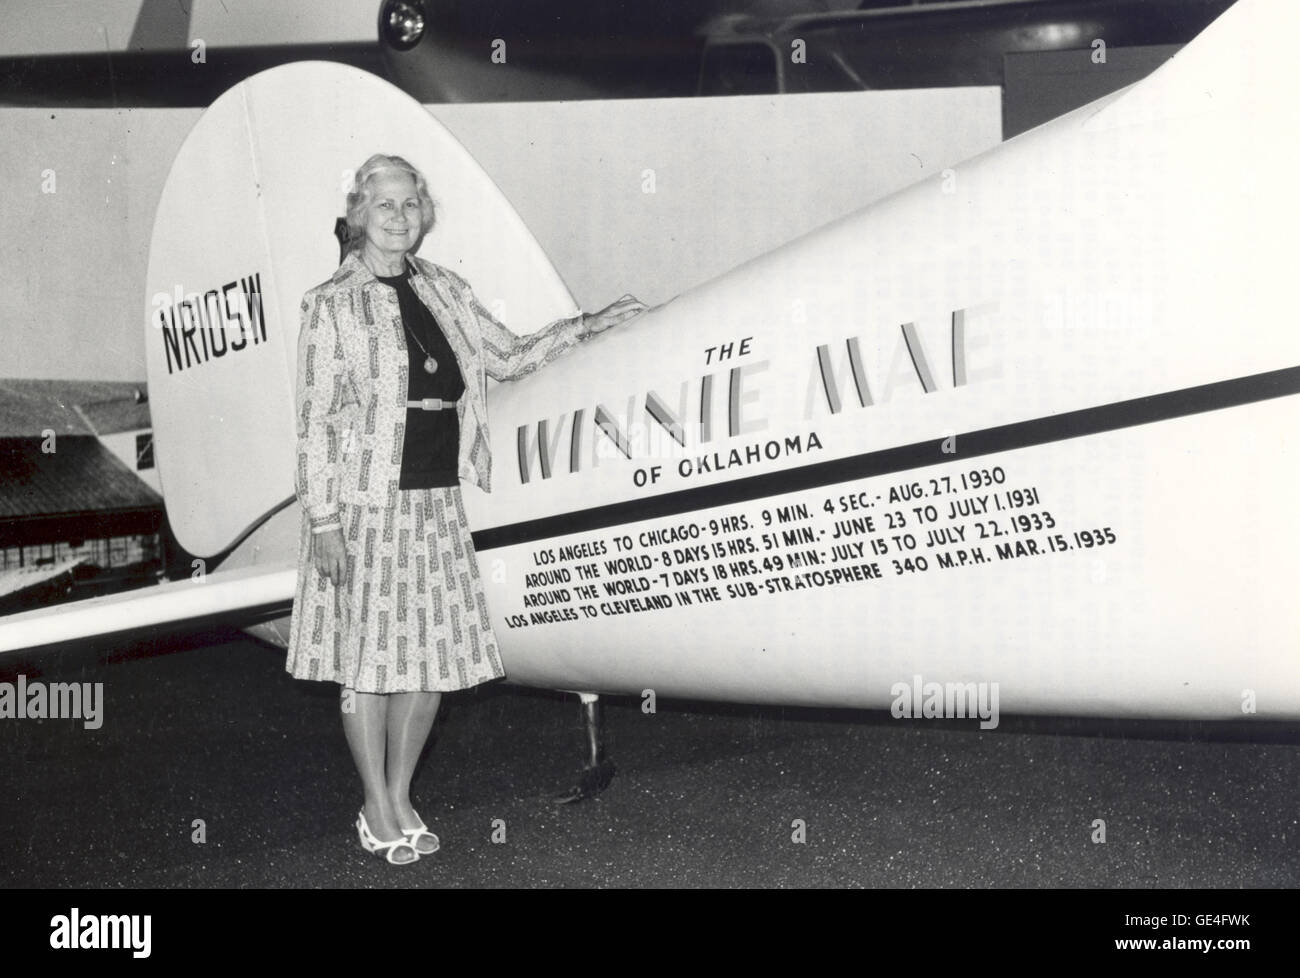 (1976) Fay Gillis Wells, writer, broadcaster, foreign correspondent, sailor, designer of boat interiors and noted aviatrix, stands in the National Air and Space Museum beside the Winnie Mae. This is the plane in which Wiley Post made his record-breaking global flight in 1933. Fay Wells participated in Posts achievement by managing the fuel dumps for the Winnie Mae in Siberia and by providing Wiley Post with the maps and navigation data. These services contributed to the success of the flight by which Post broke his own global record of 1931. Invited by Wiley Post to fly with him on a global mi Stock Photo